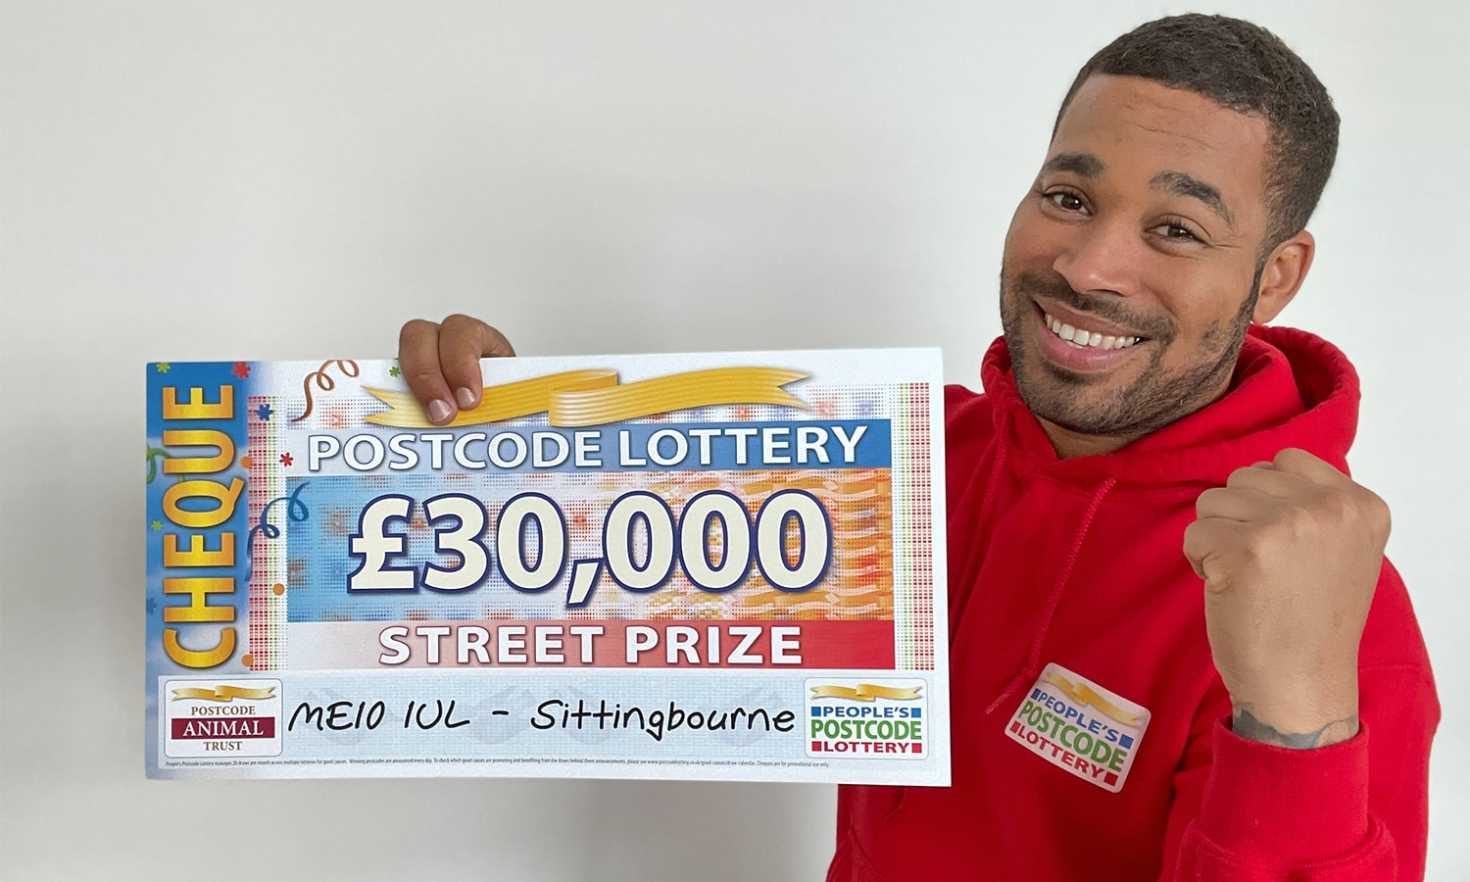 Today's £30,000 Street Prizes are heading to six lucky players with a Sittingbourne postcode